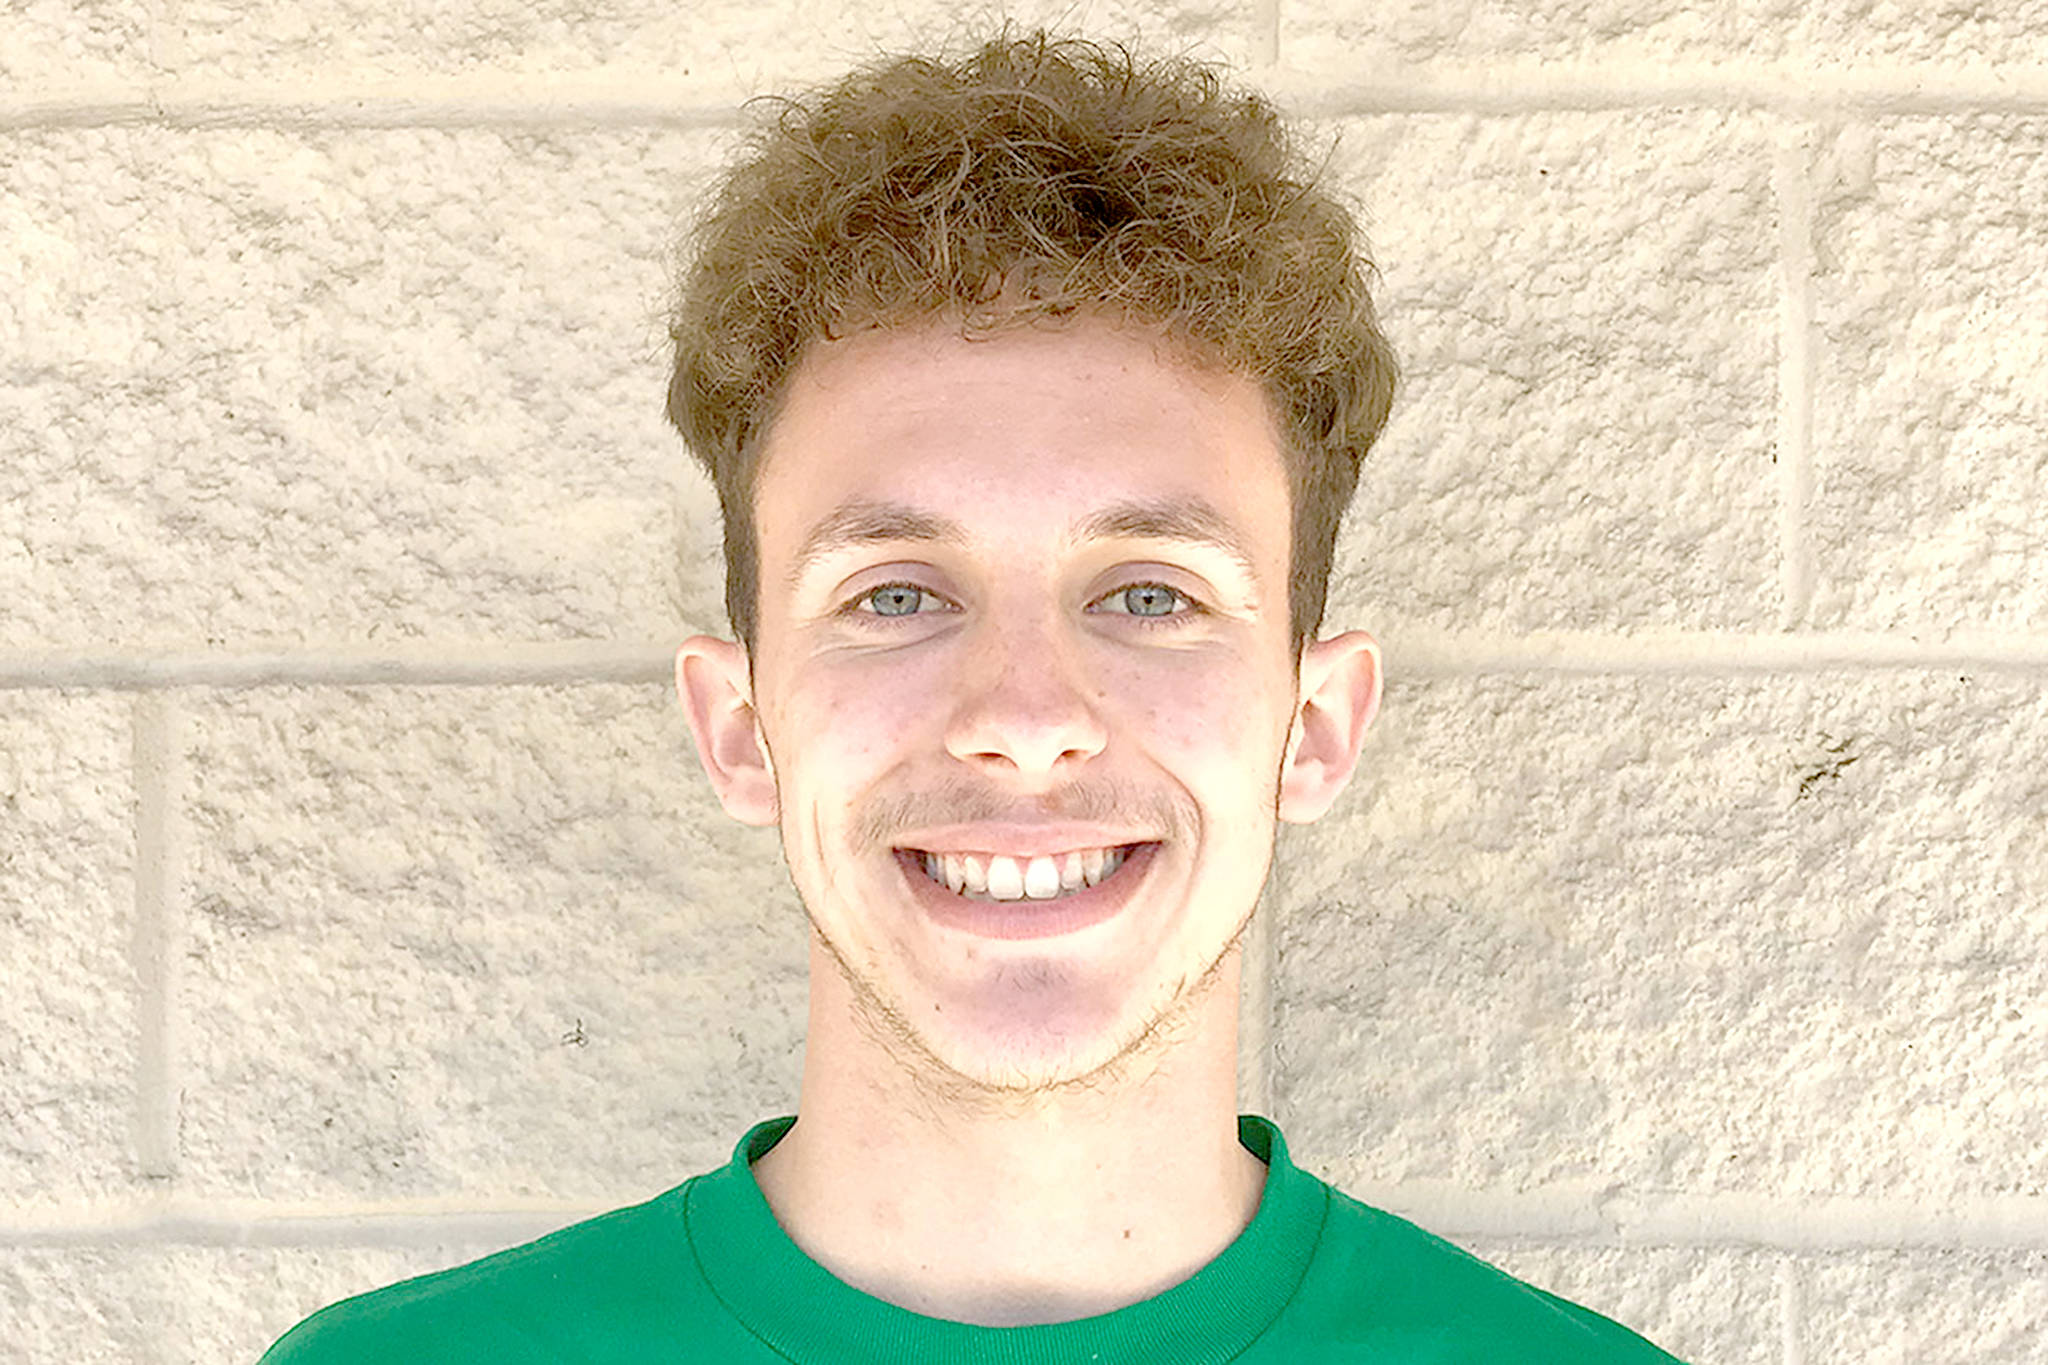 ATHLETE OF THE WEEK: Andrew St. George, Port Angeles boys’ soccer